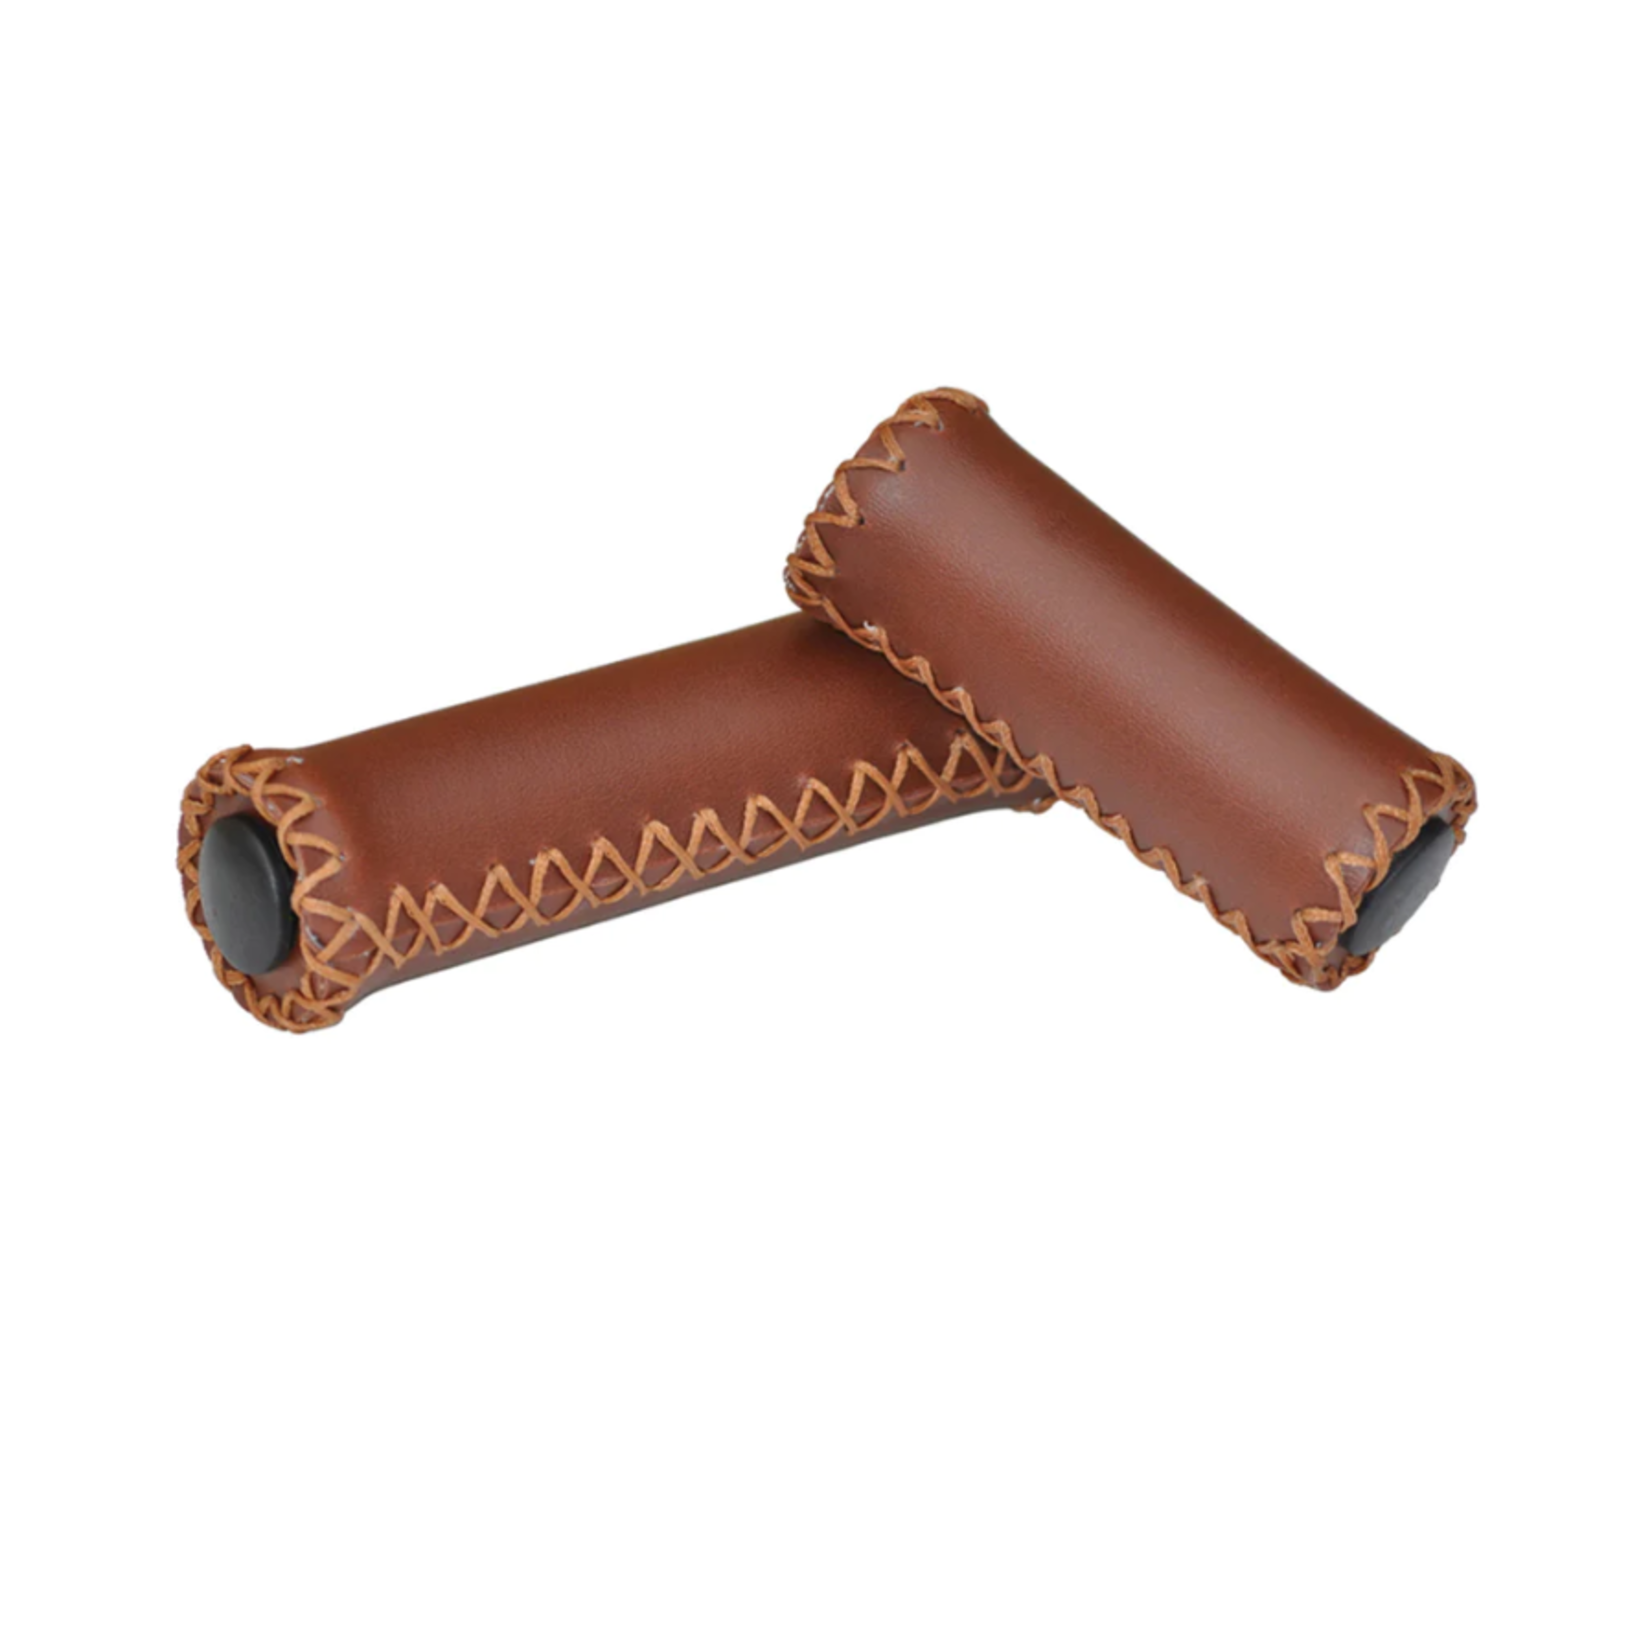 Firmstrong Firmstrong Pleather Grips Multi Spd Brown